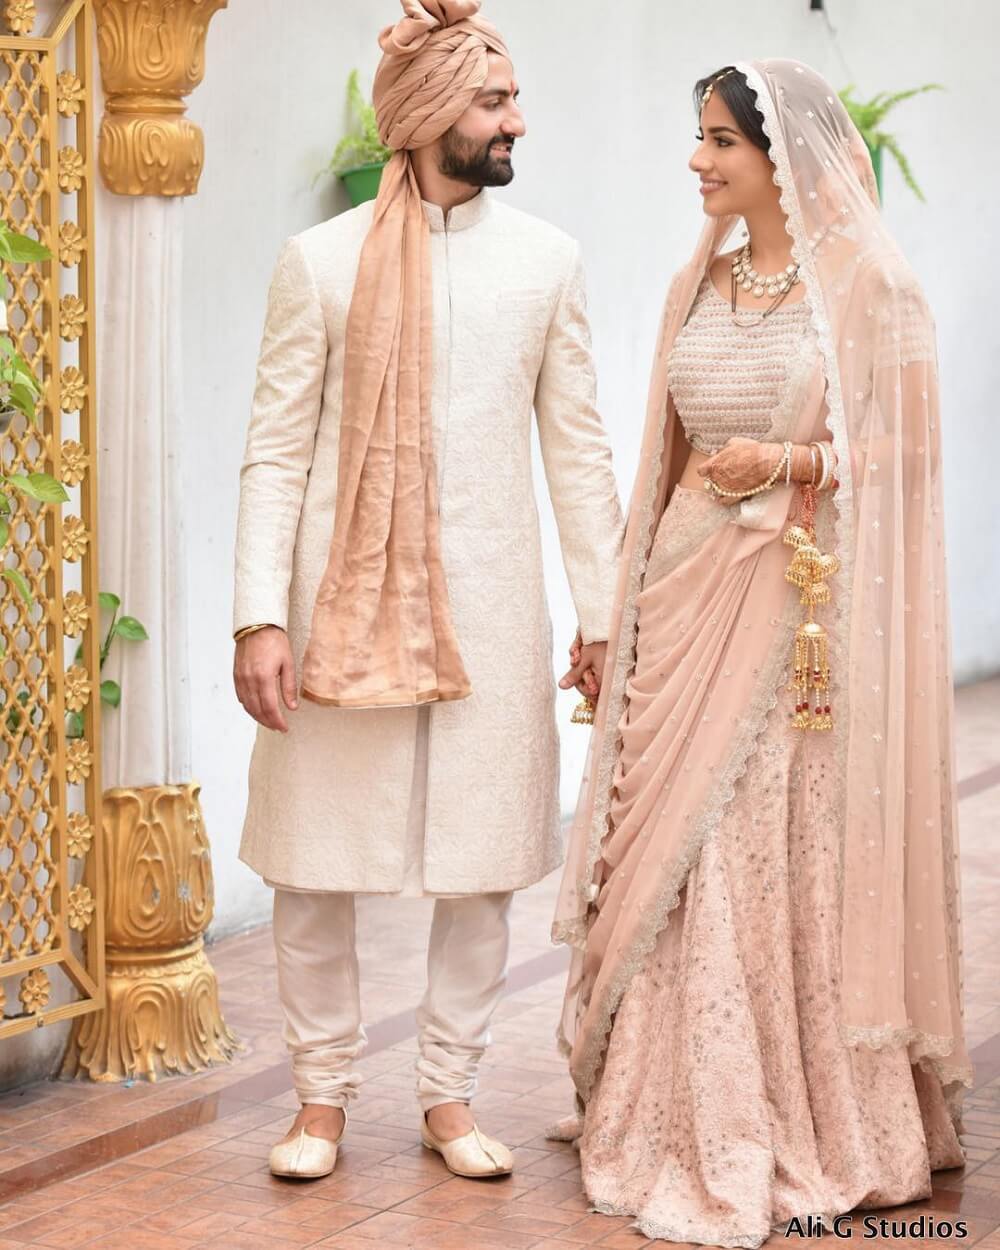 7 Gorgeous Color Combinations for Indian Wedding Outfits